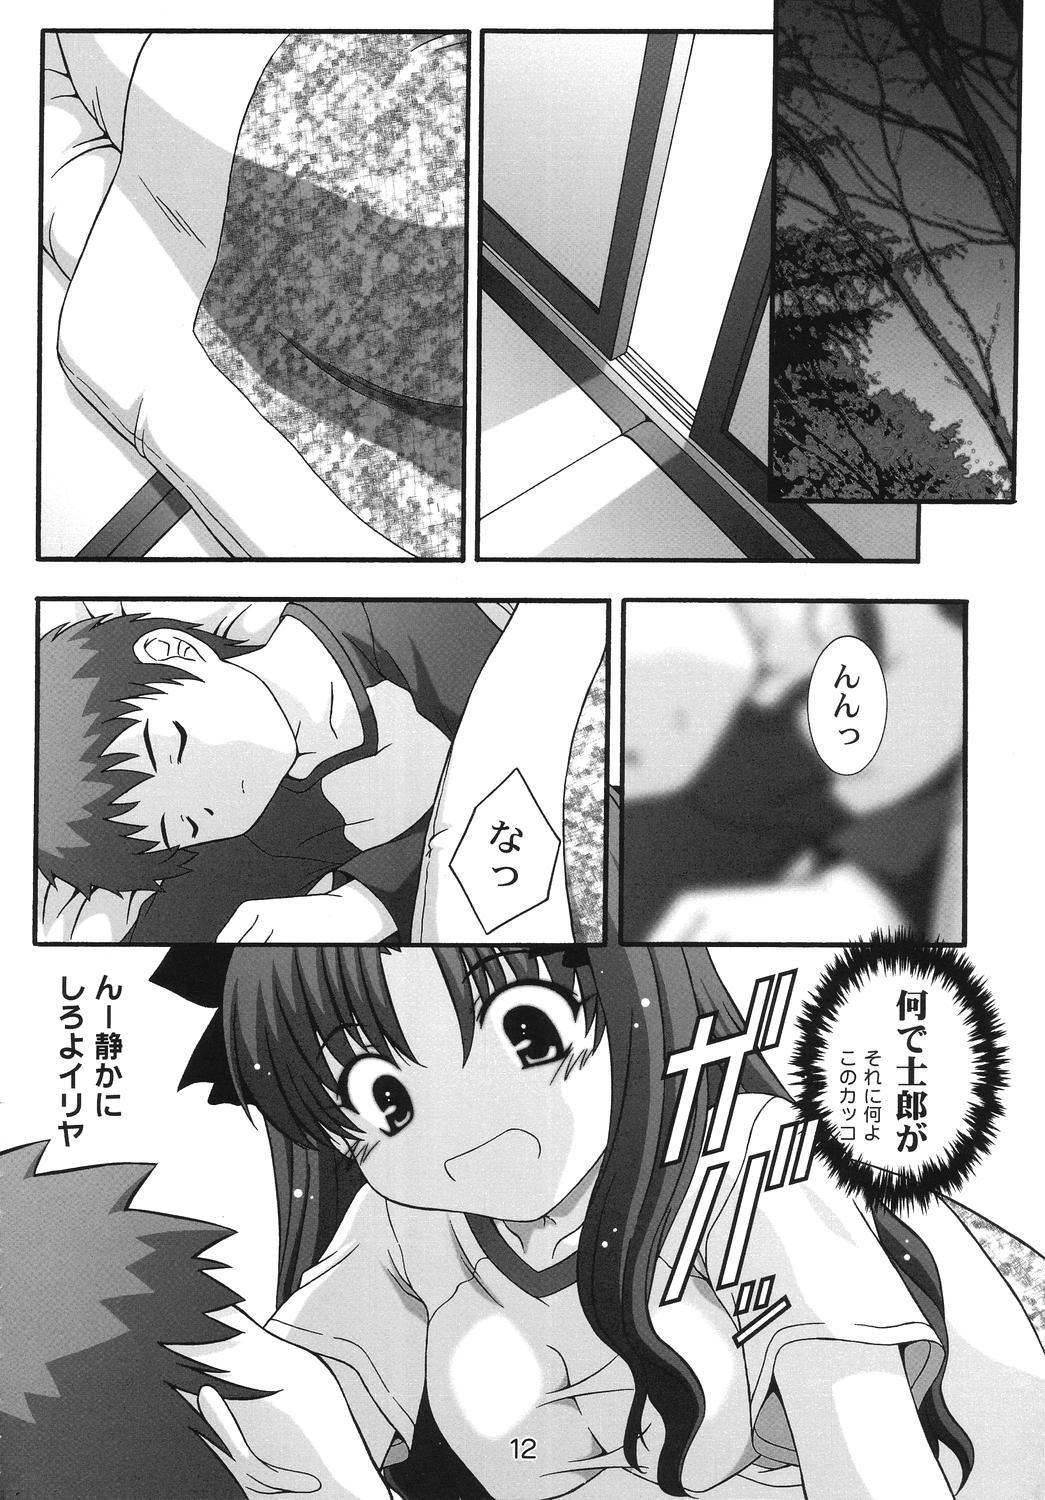 Chile SECRET FILE NEXT 11 - Fate is capricious - Fate stay night Hidden - Page 11